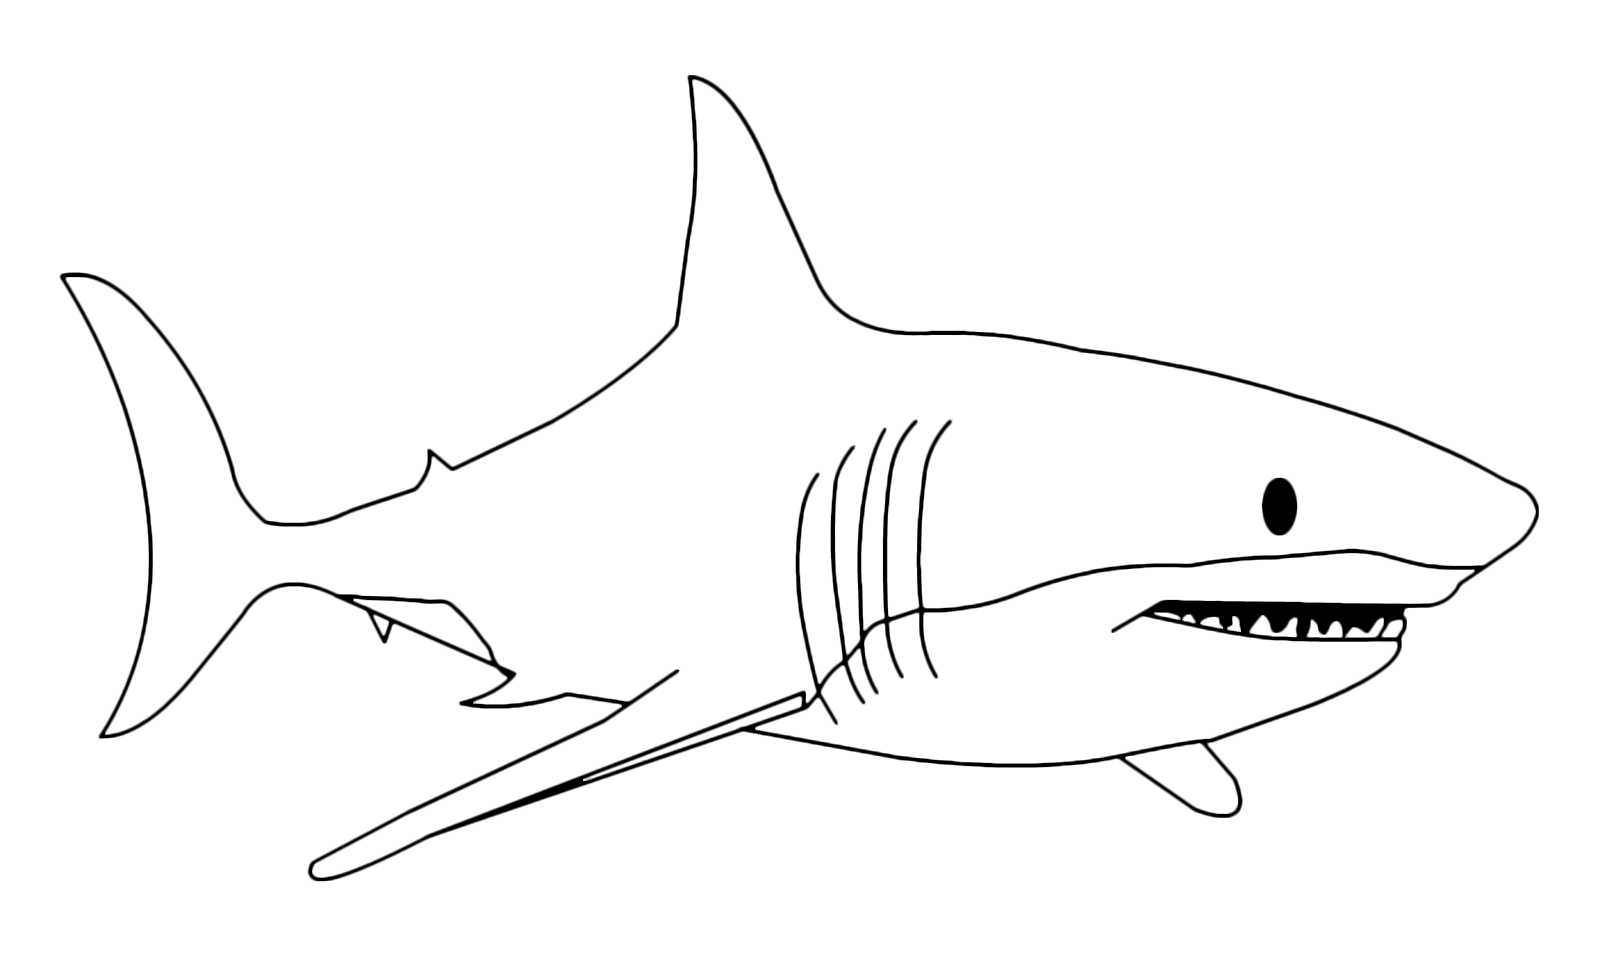 Animals - The fearsome white shark